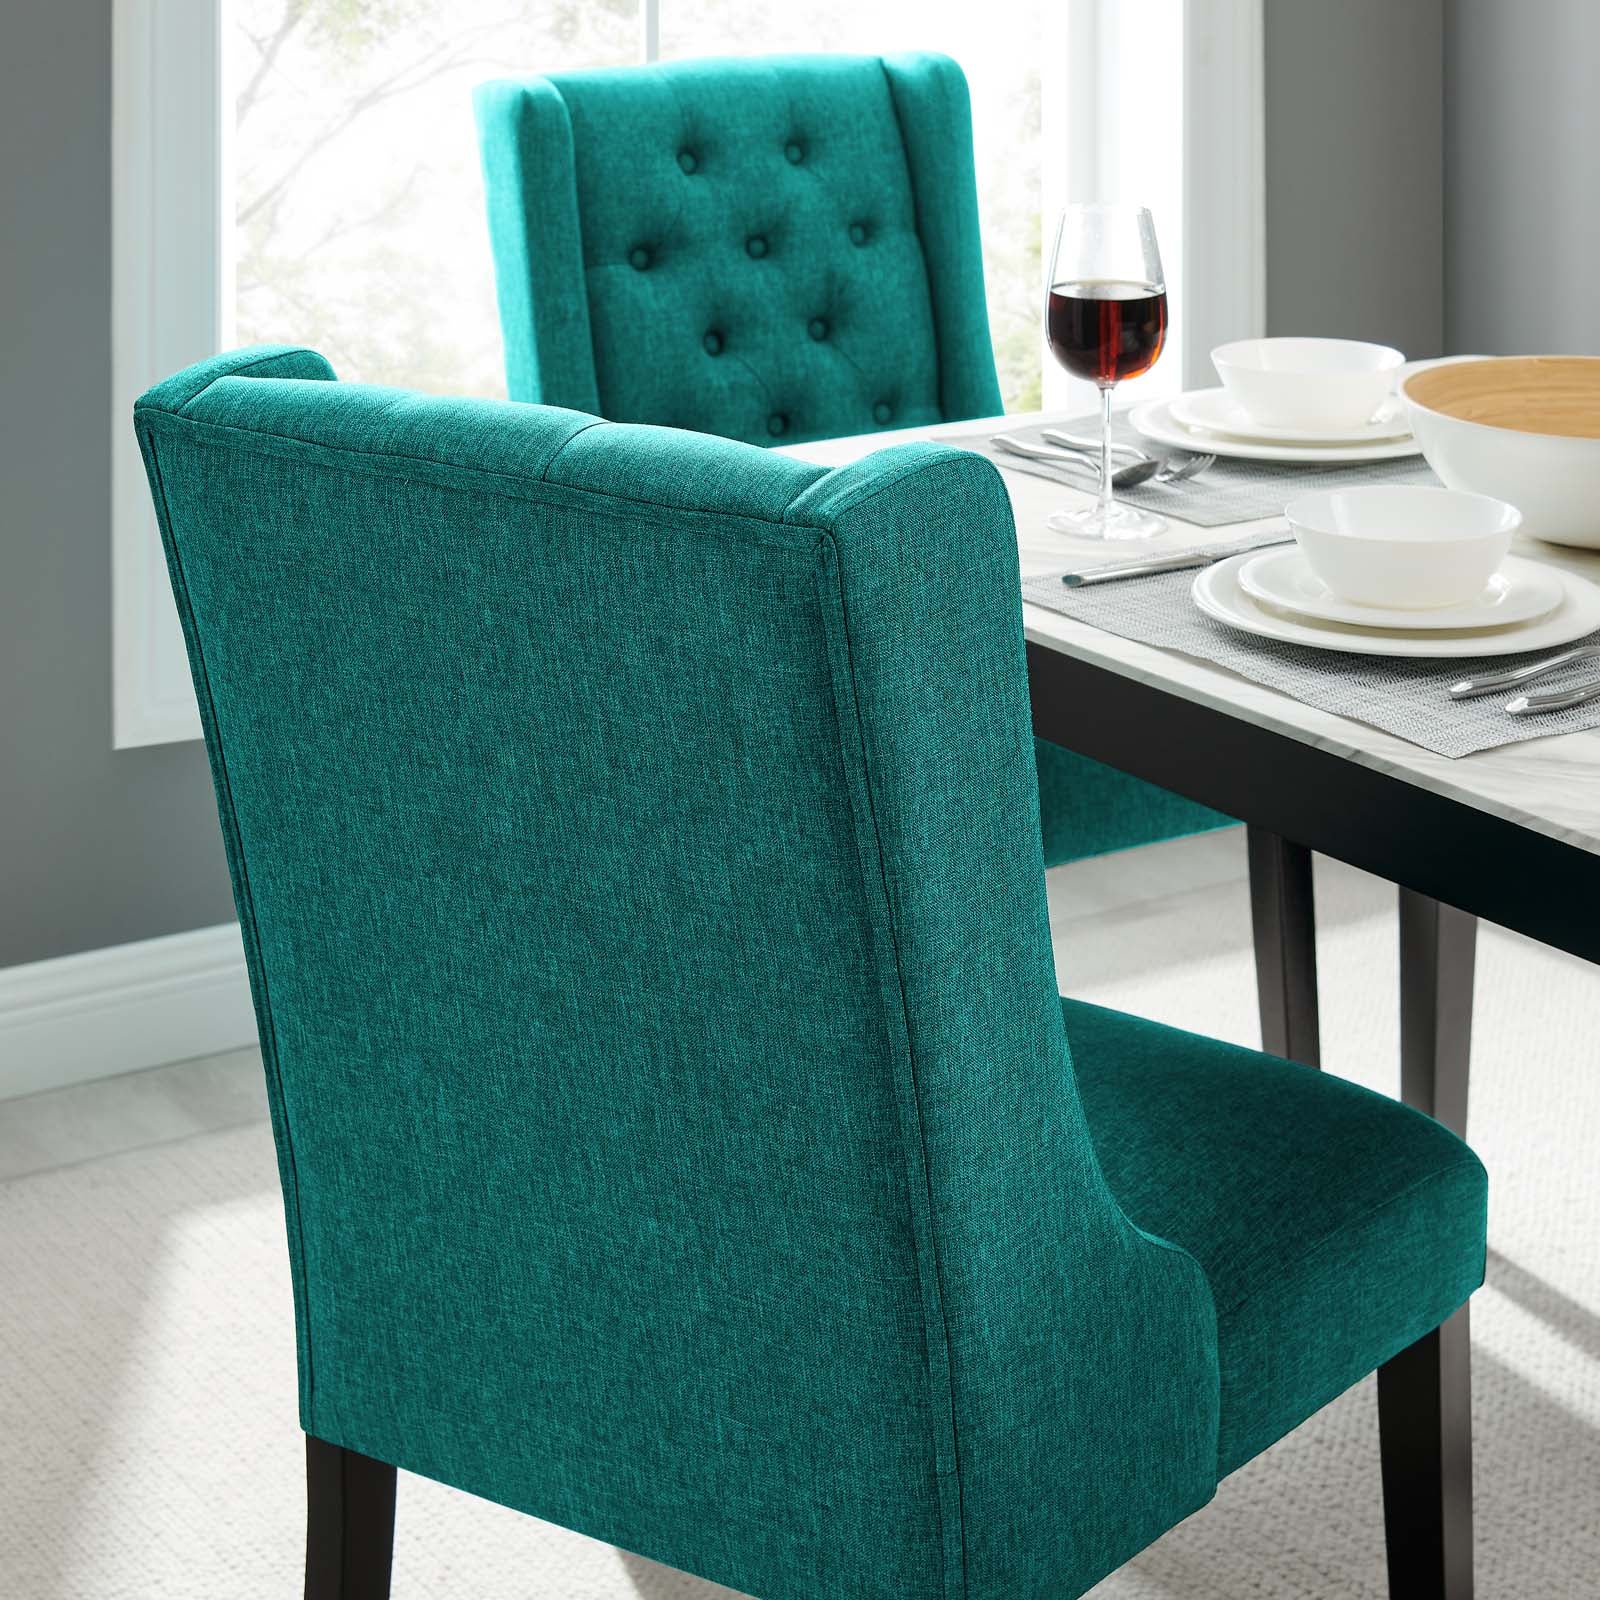 Baronet Button Tufted Fabric Dining Chair - East Shore Modern Home Furnishings